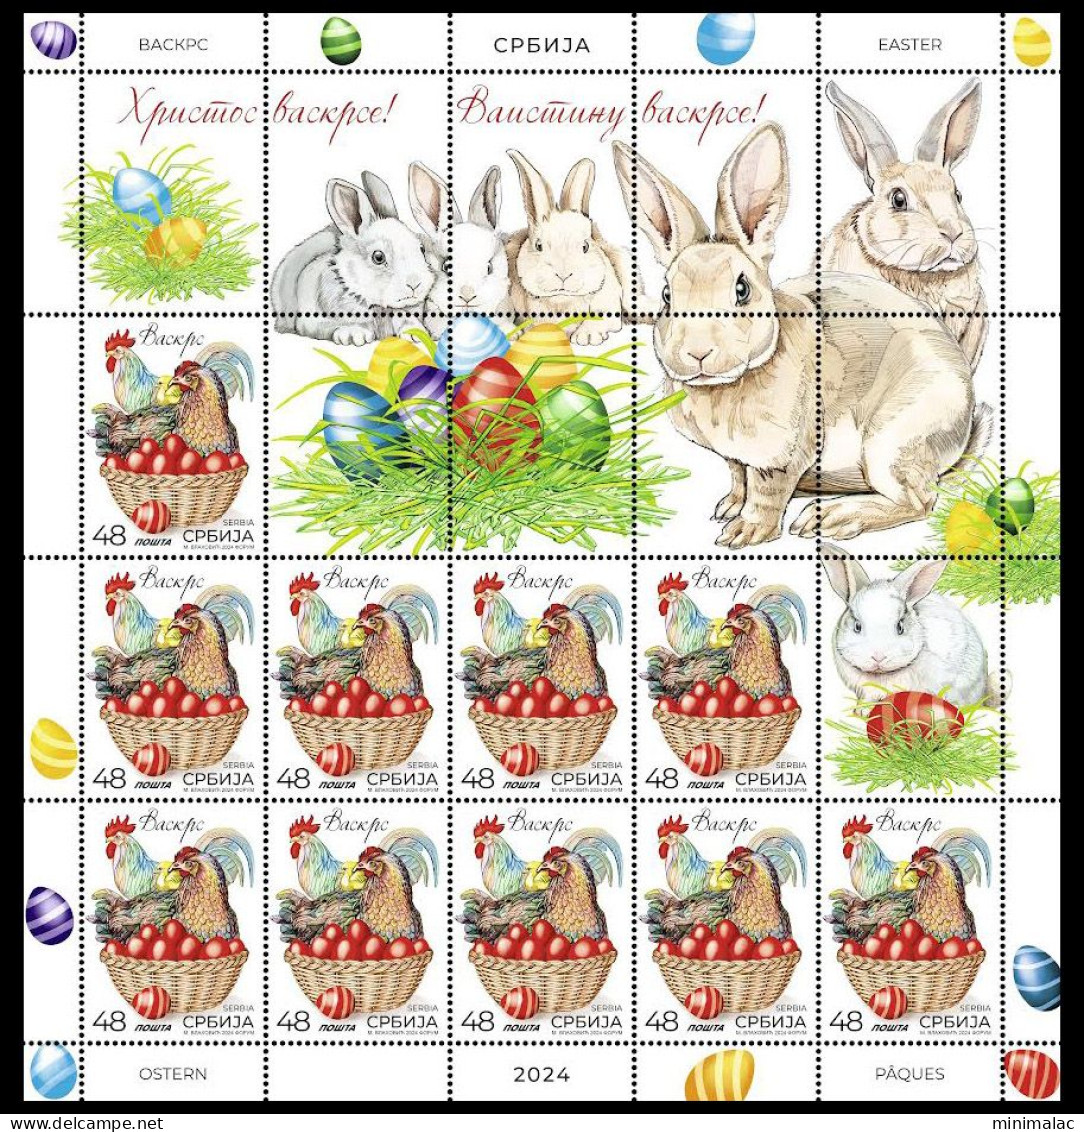 Serbia 2024. Easter, Religions, Christianity, Eggs, Chicken, Rabbit, Sheet, MNH - Easter